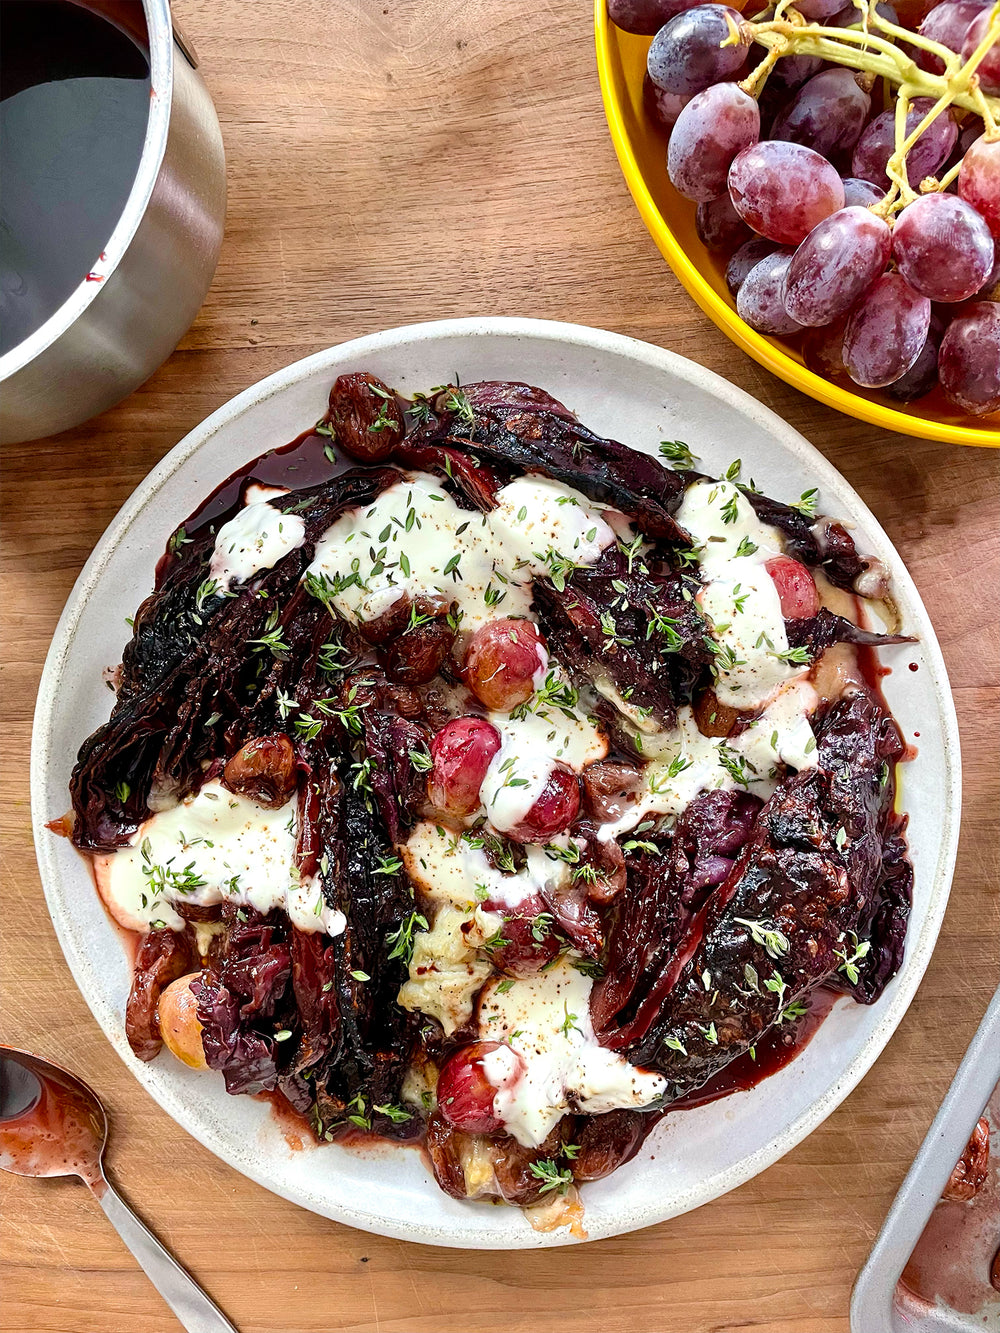 Grilled red cabbage with gorgonzola and grapes